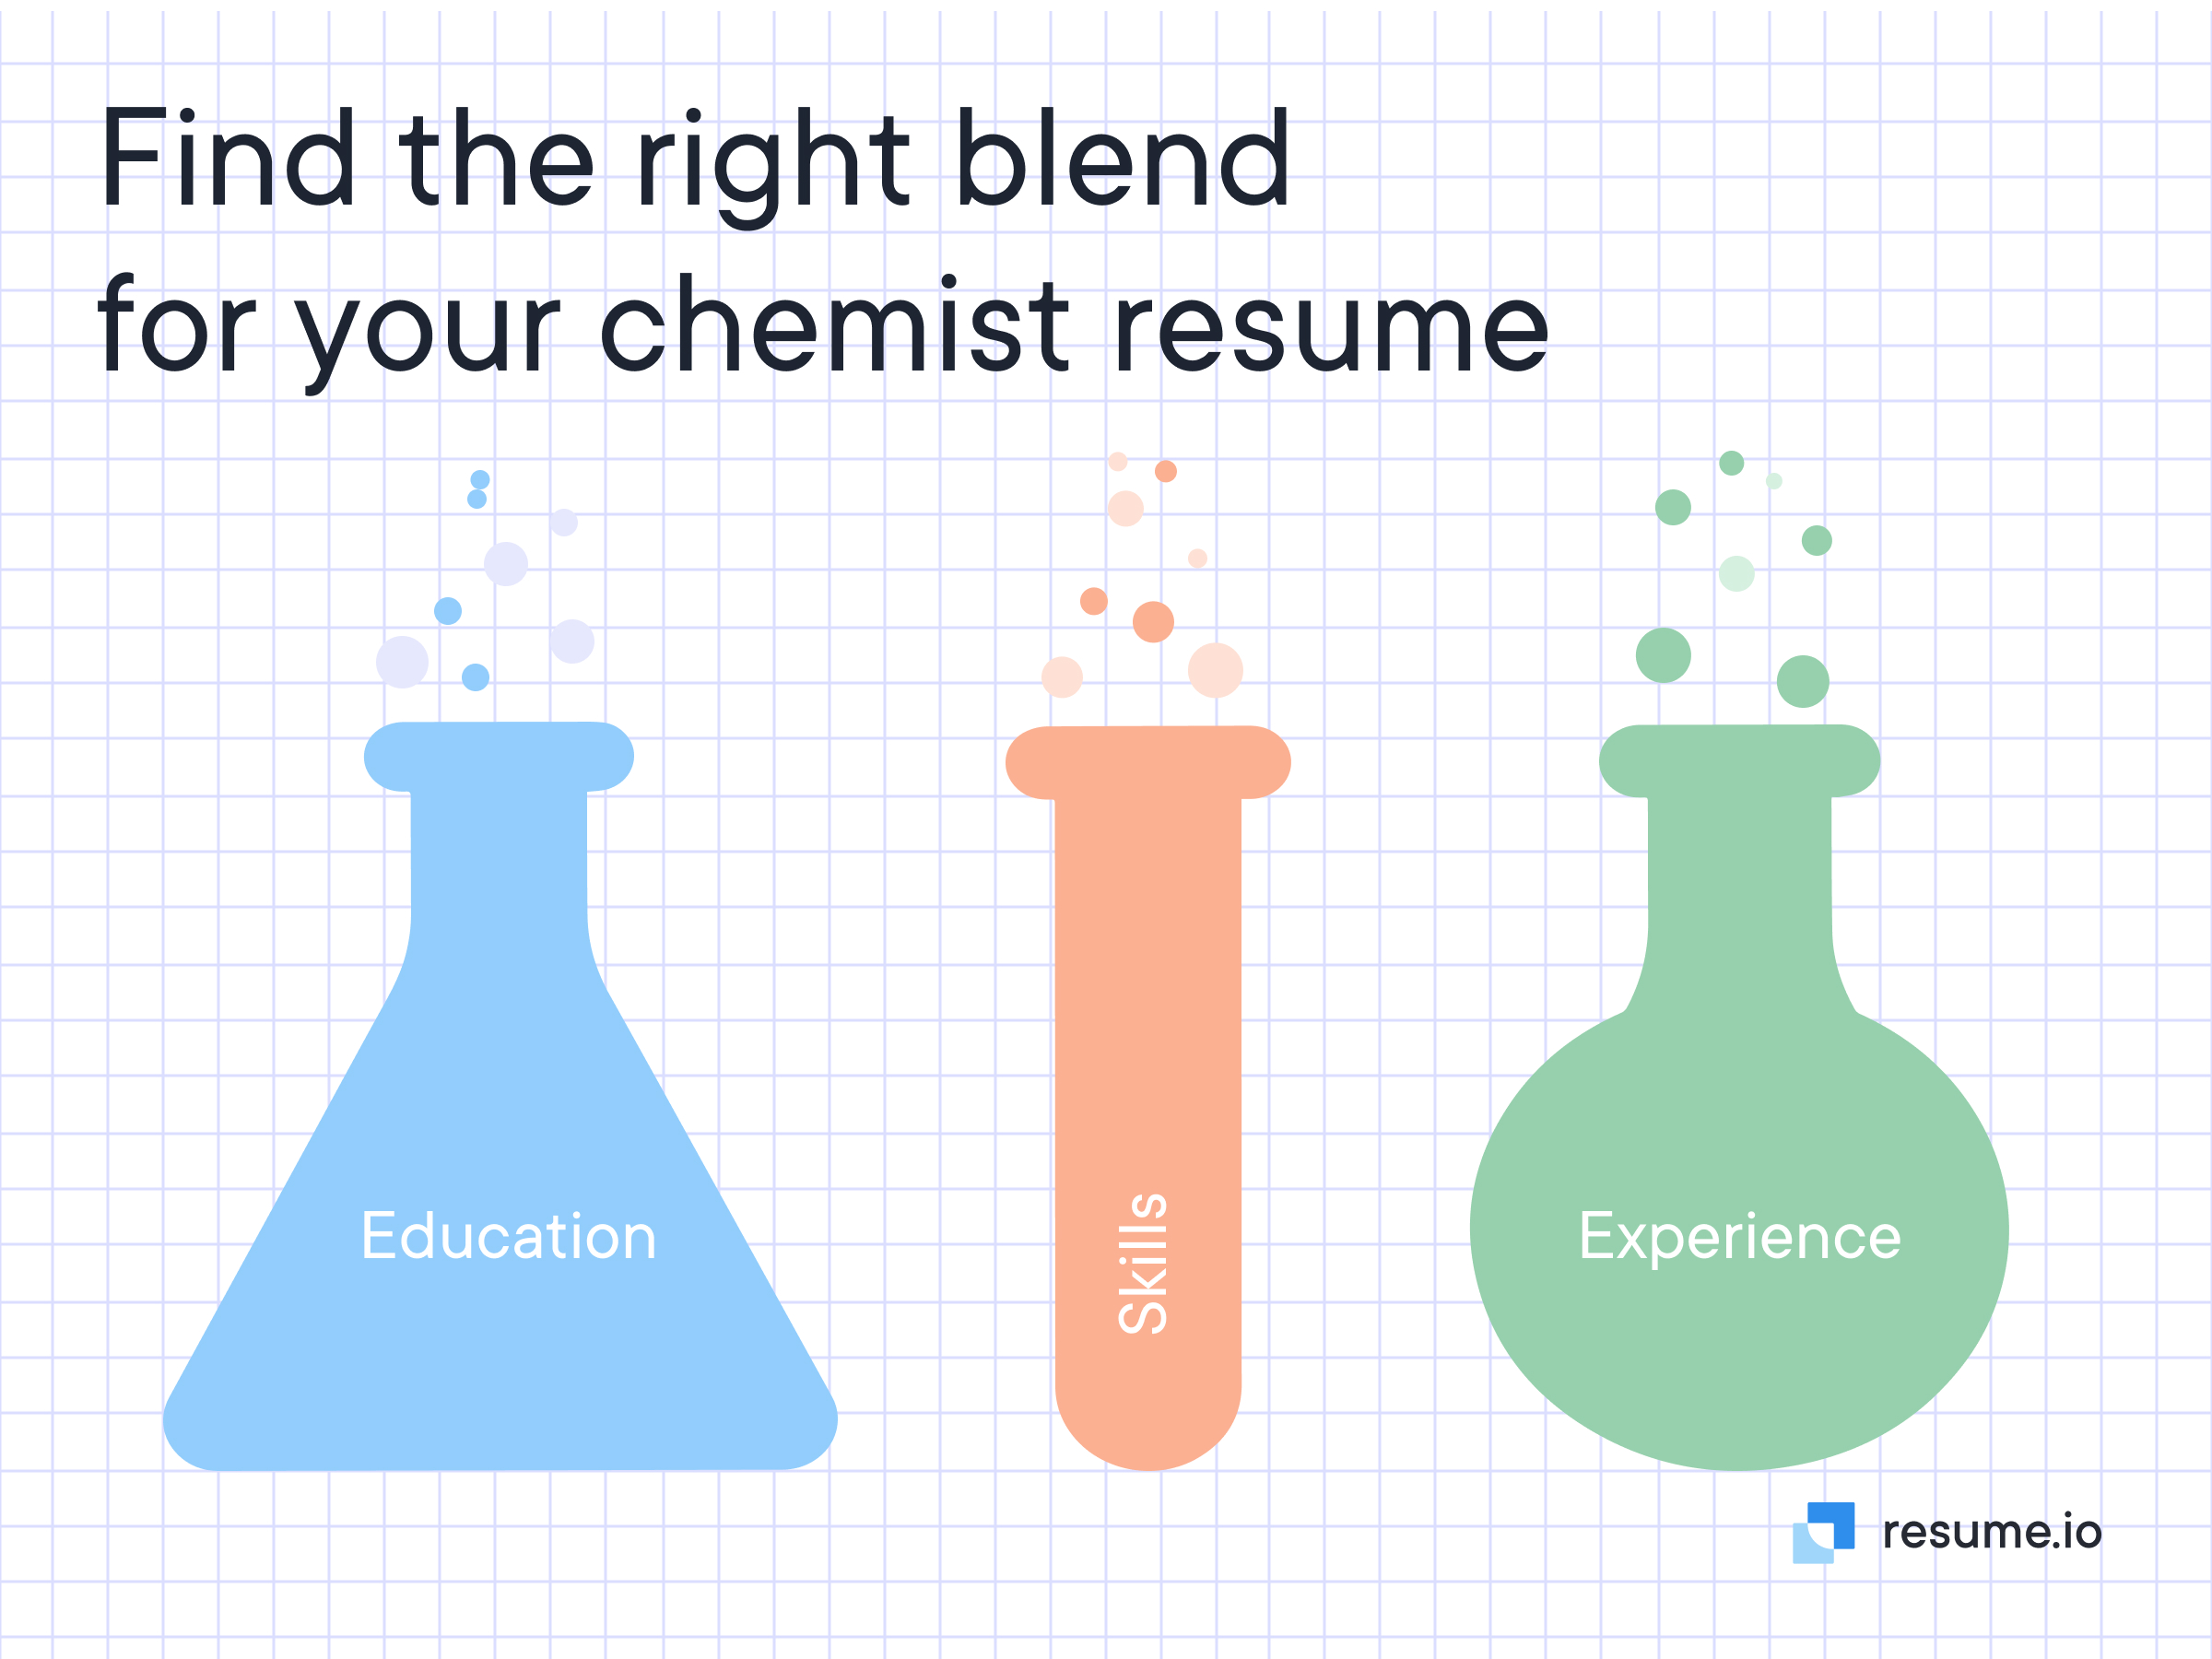 Find the right blend for you chemist resume with education, skills and experience on your resume!